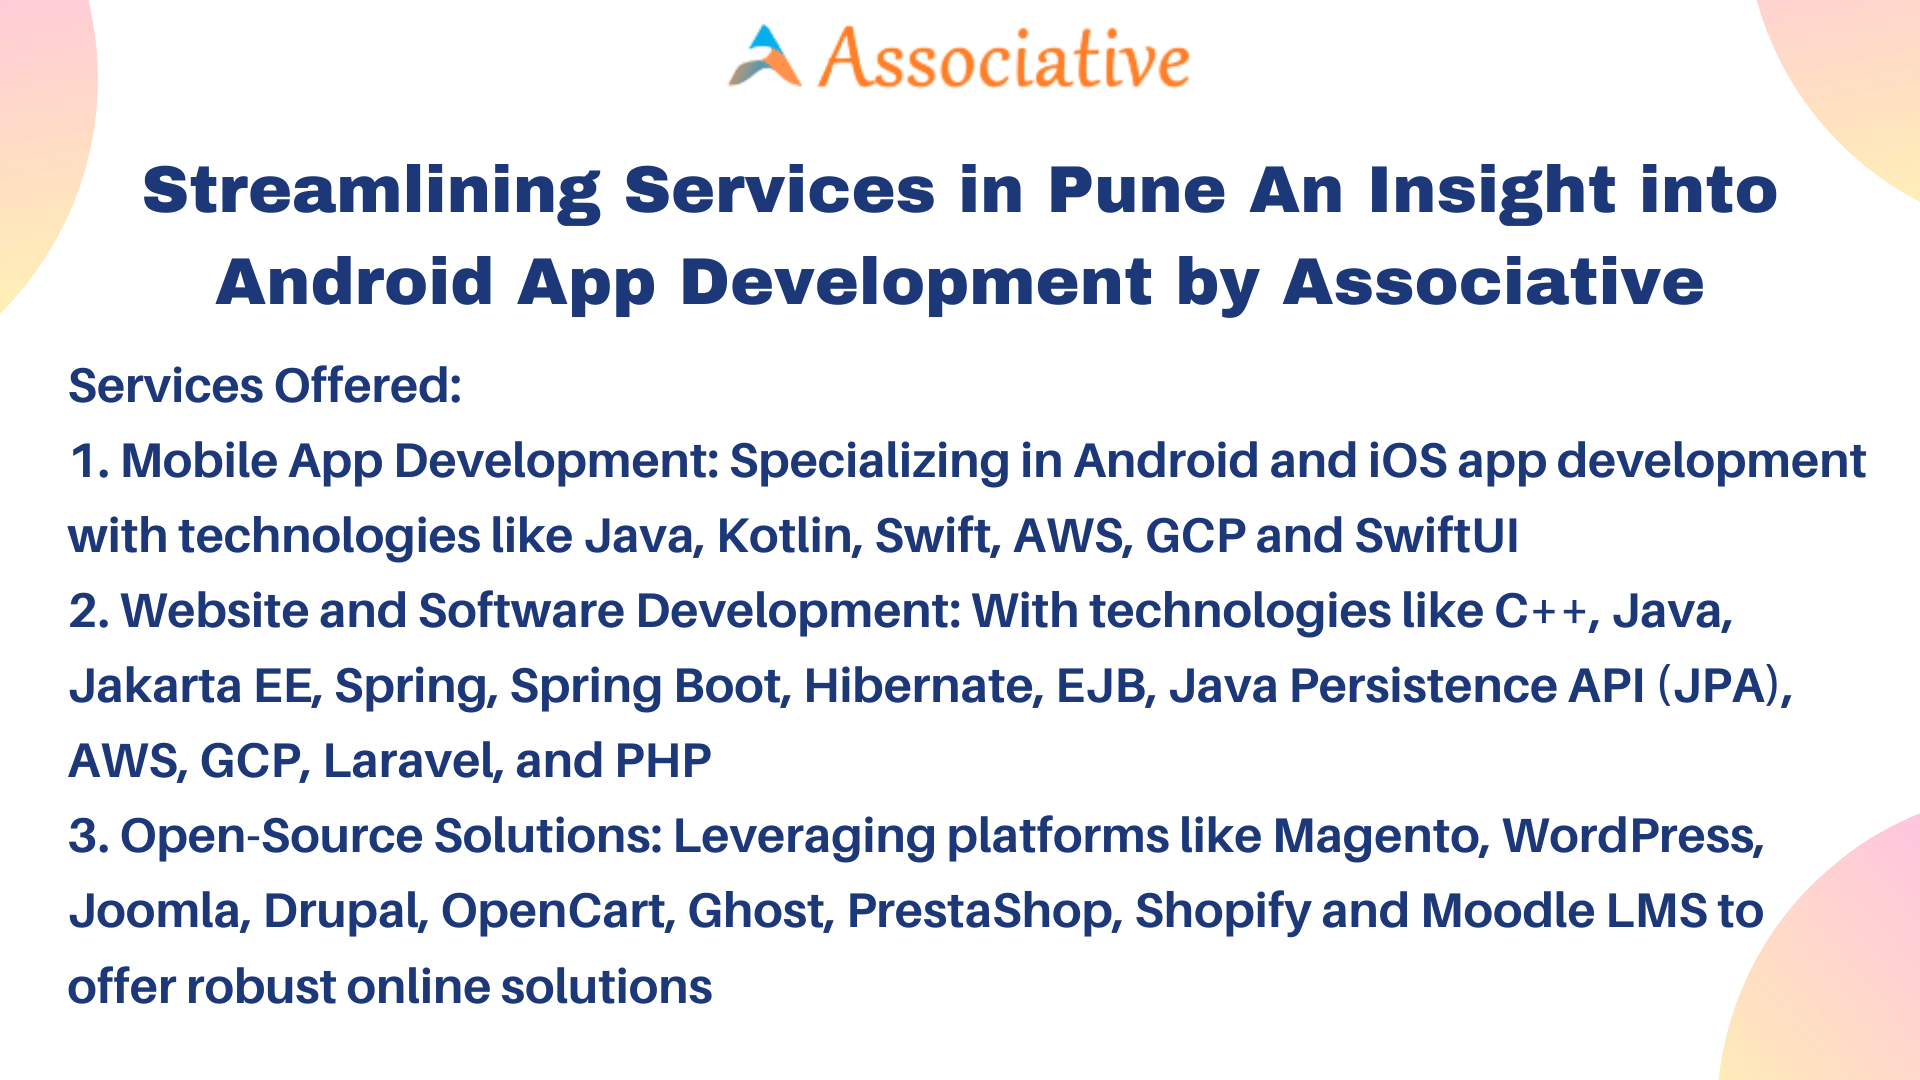 Streamlining Services in Pune An Insight into Android App Development by Associative